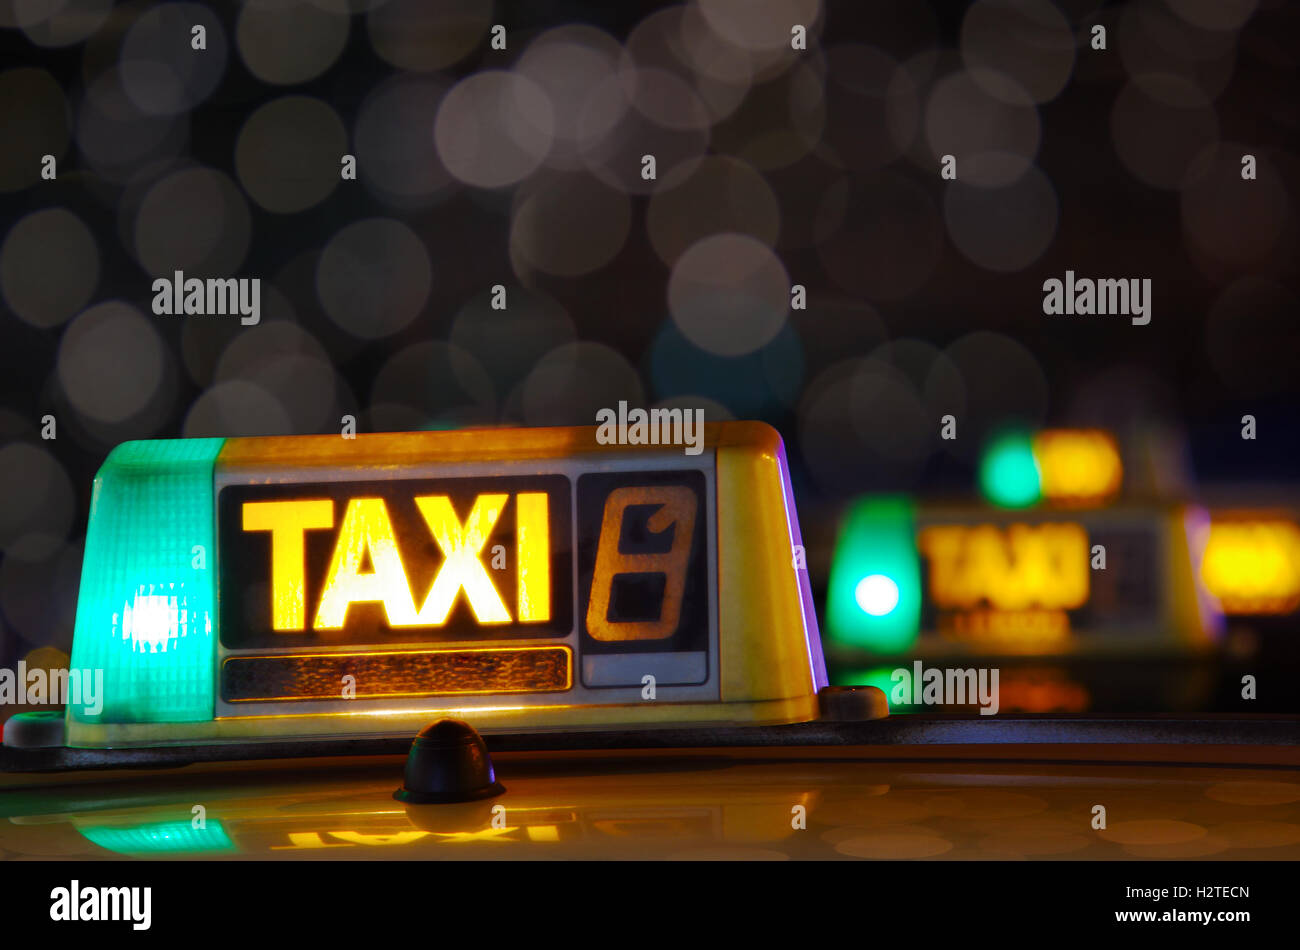 Row of taxi signs from parked taxis in a city street at night Stock Photo